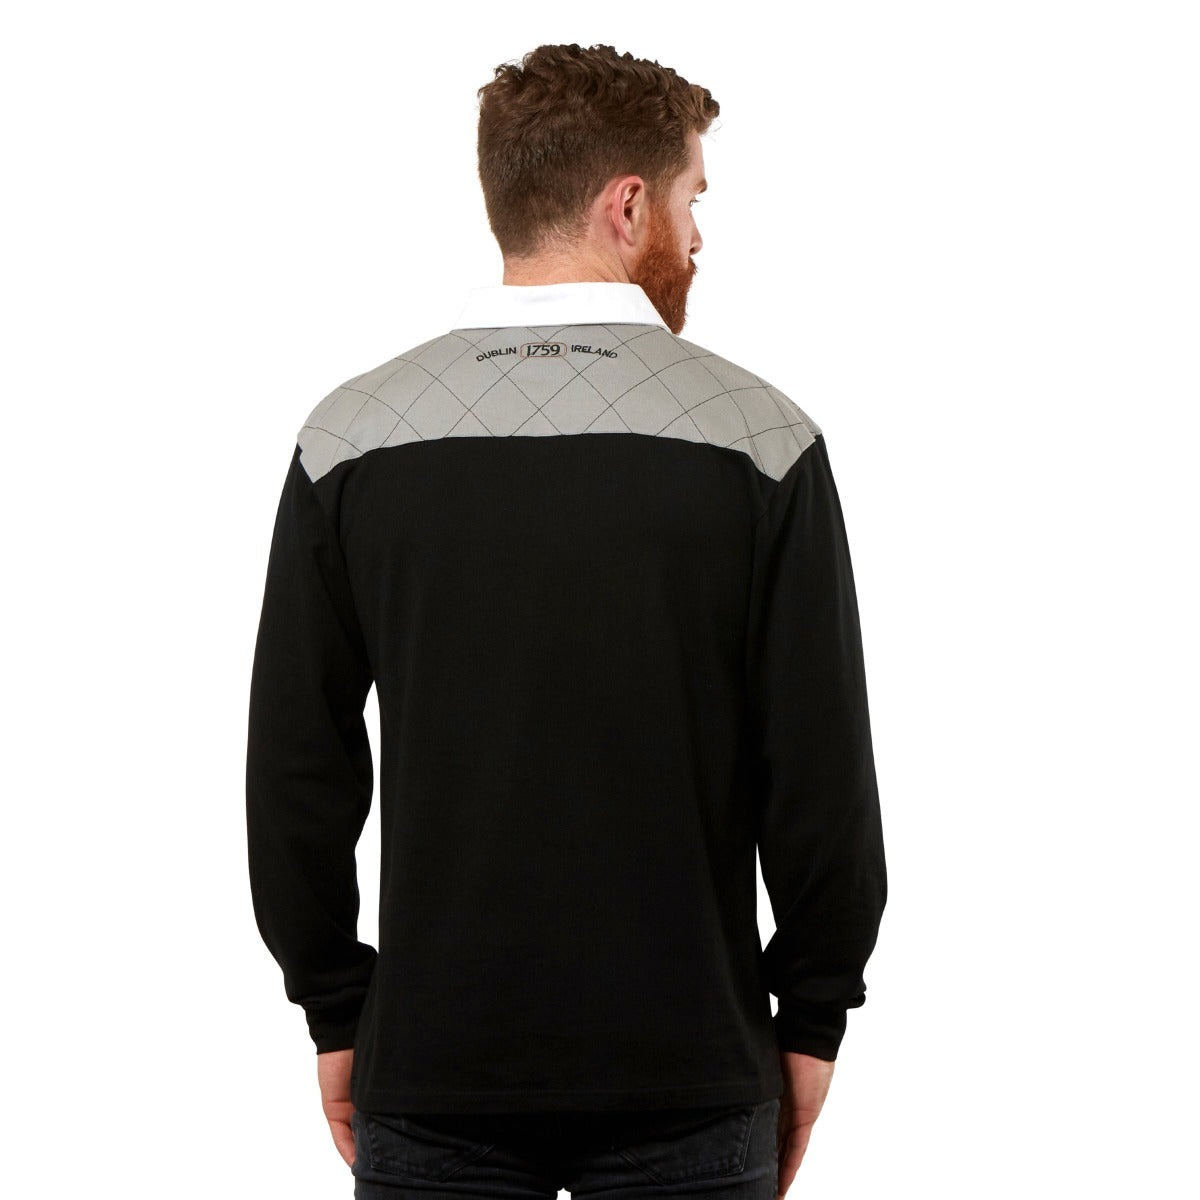 The back view of a man wearing a Guinness Heritage Charcoal Grey and Black Long Sleeve Rugby Jersey made by Guinness UK, in 100% cotton material.